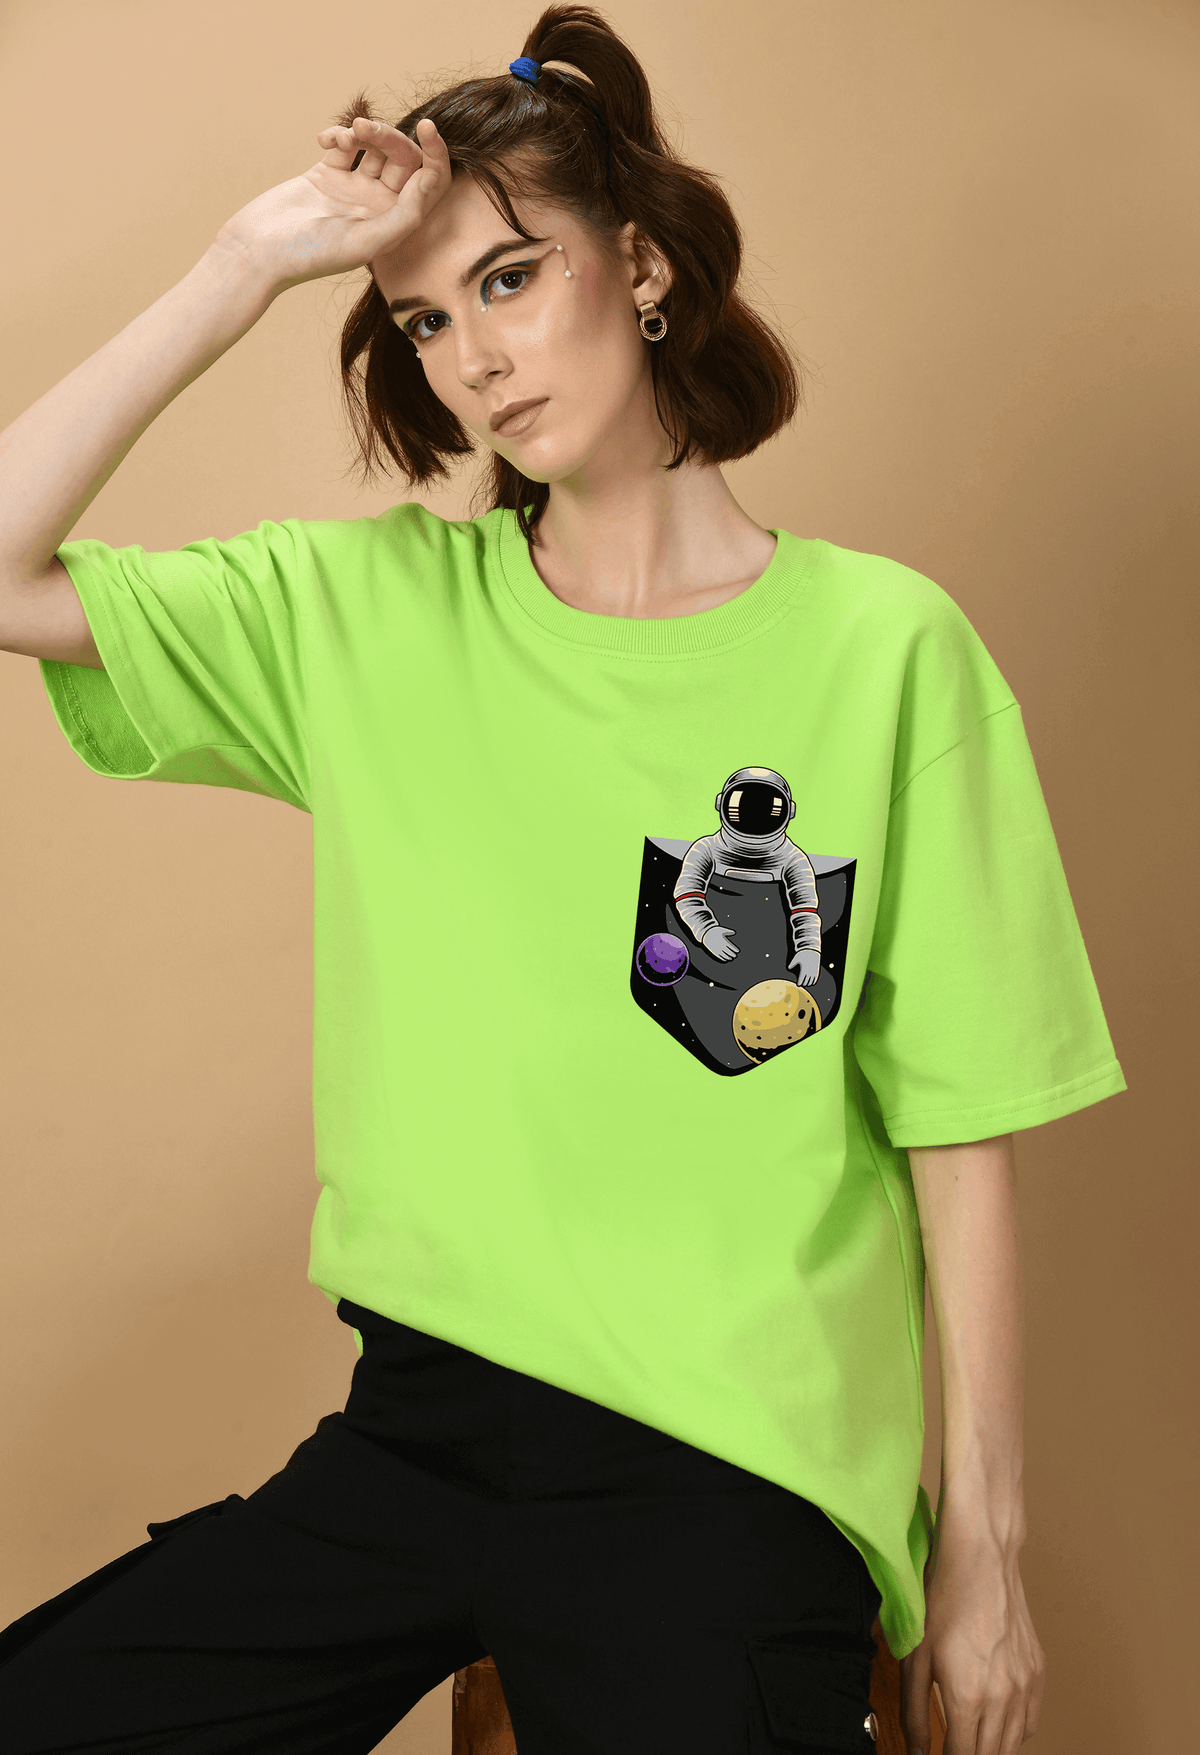 Pocket astronaut printed neon green oversized t-shirt by offmint